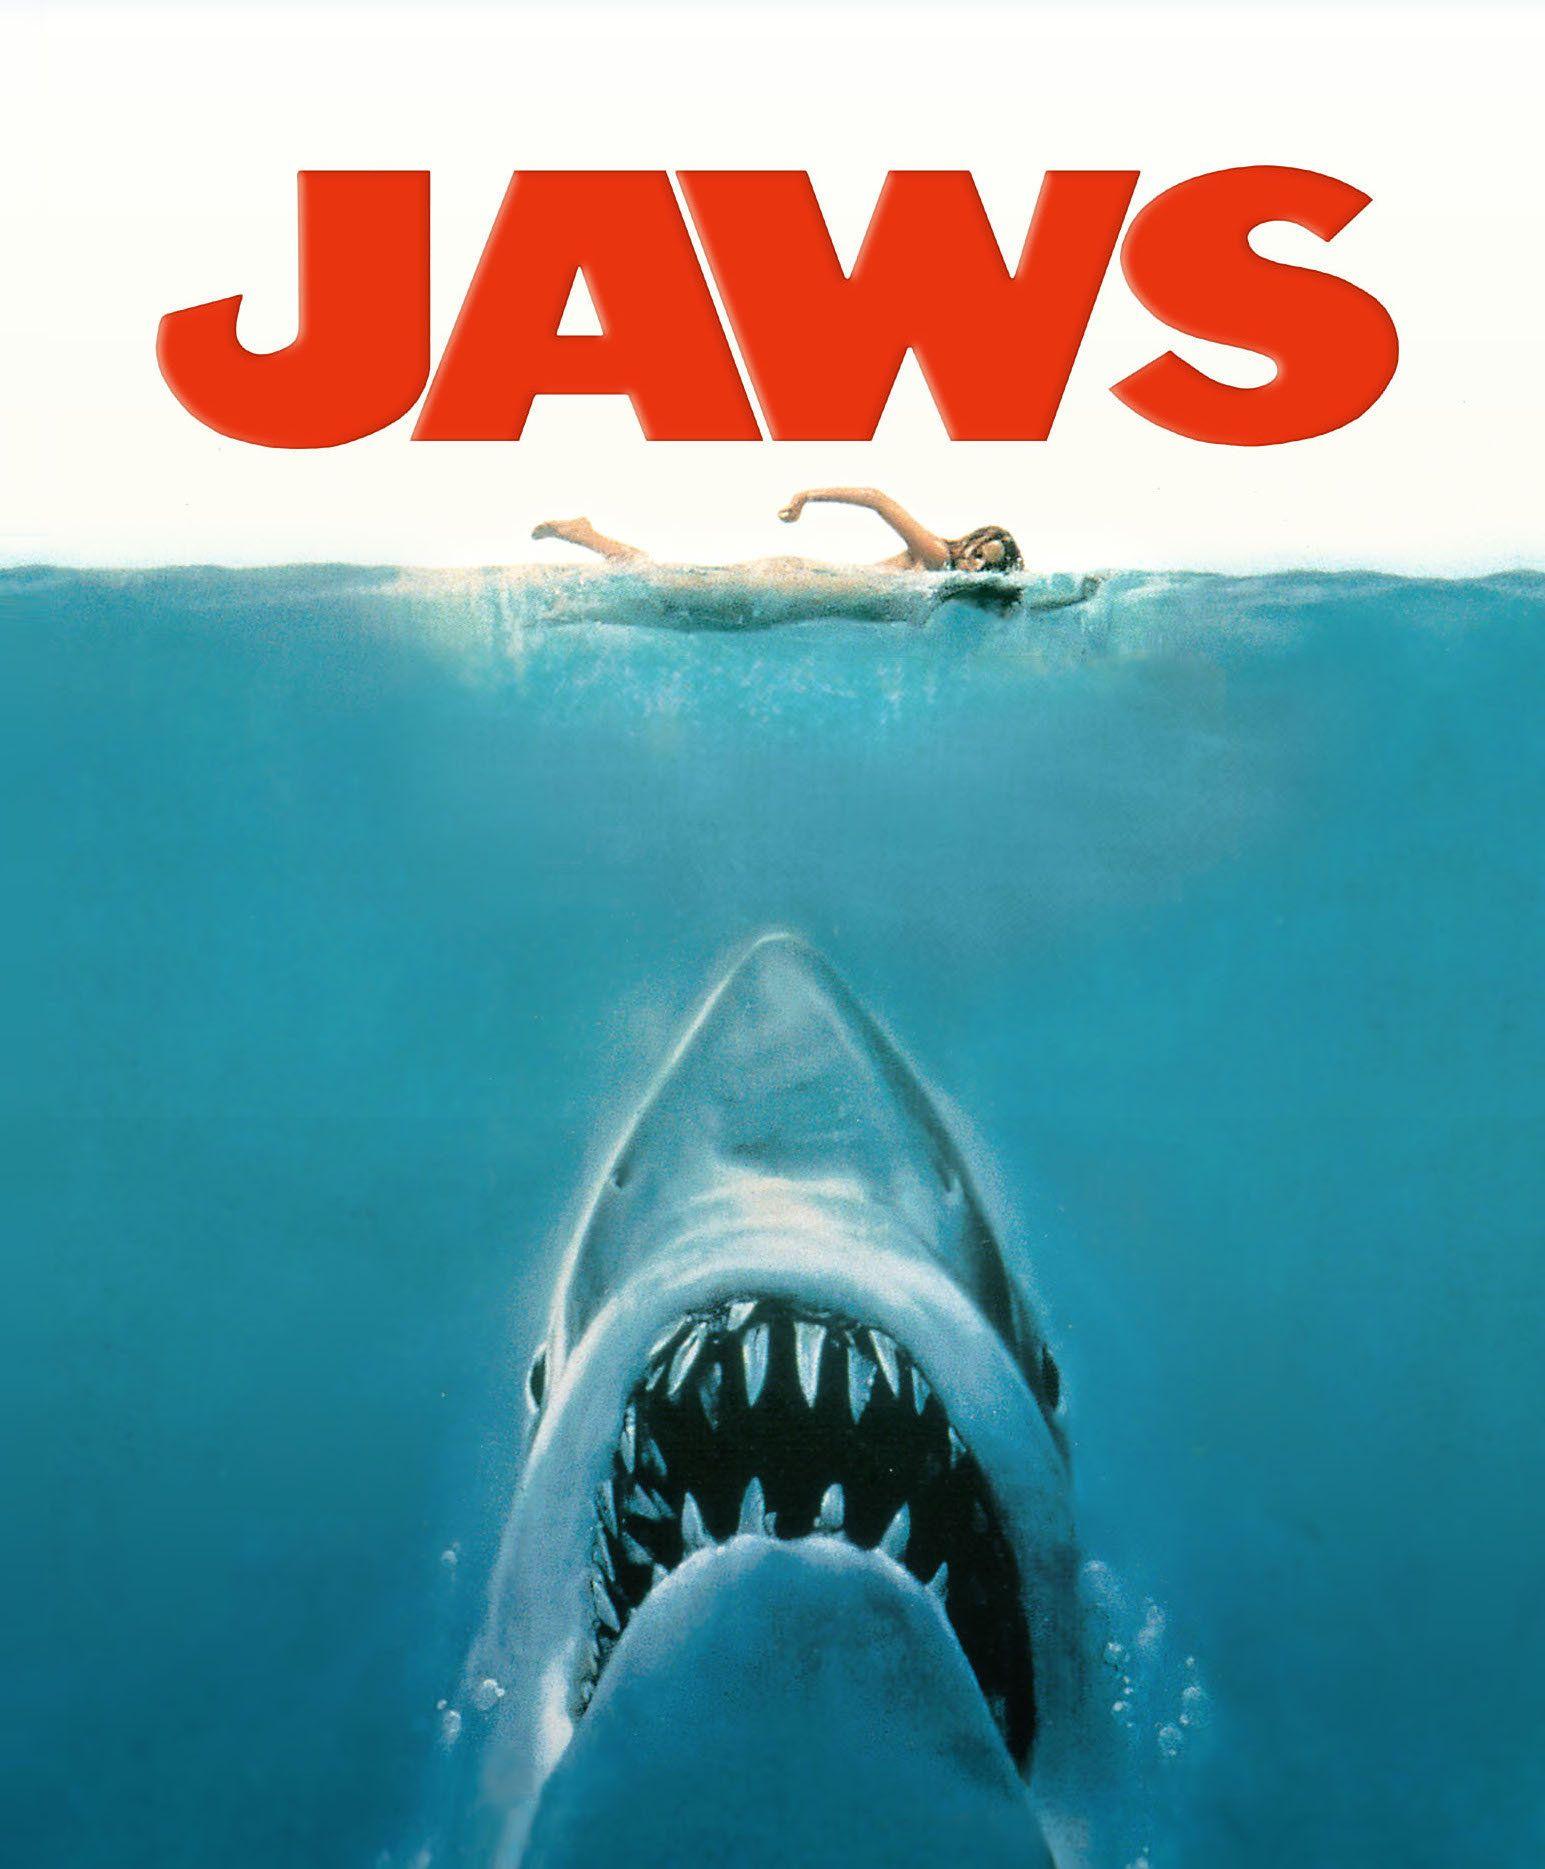 Jaws Logo - Jaws Movie Poster 5 Area Chamber Of Commerce